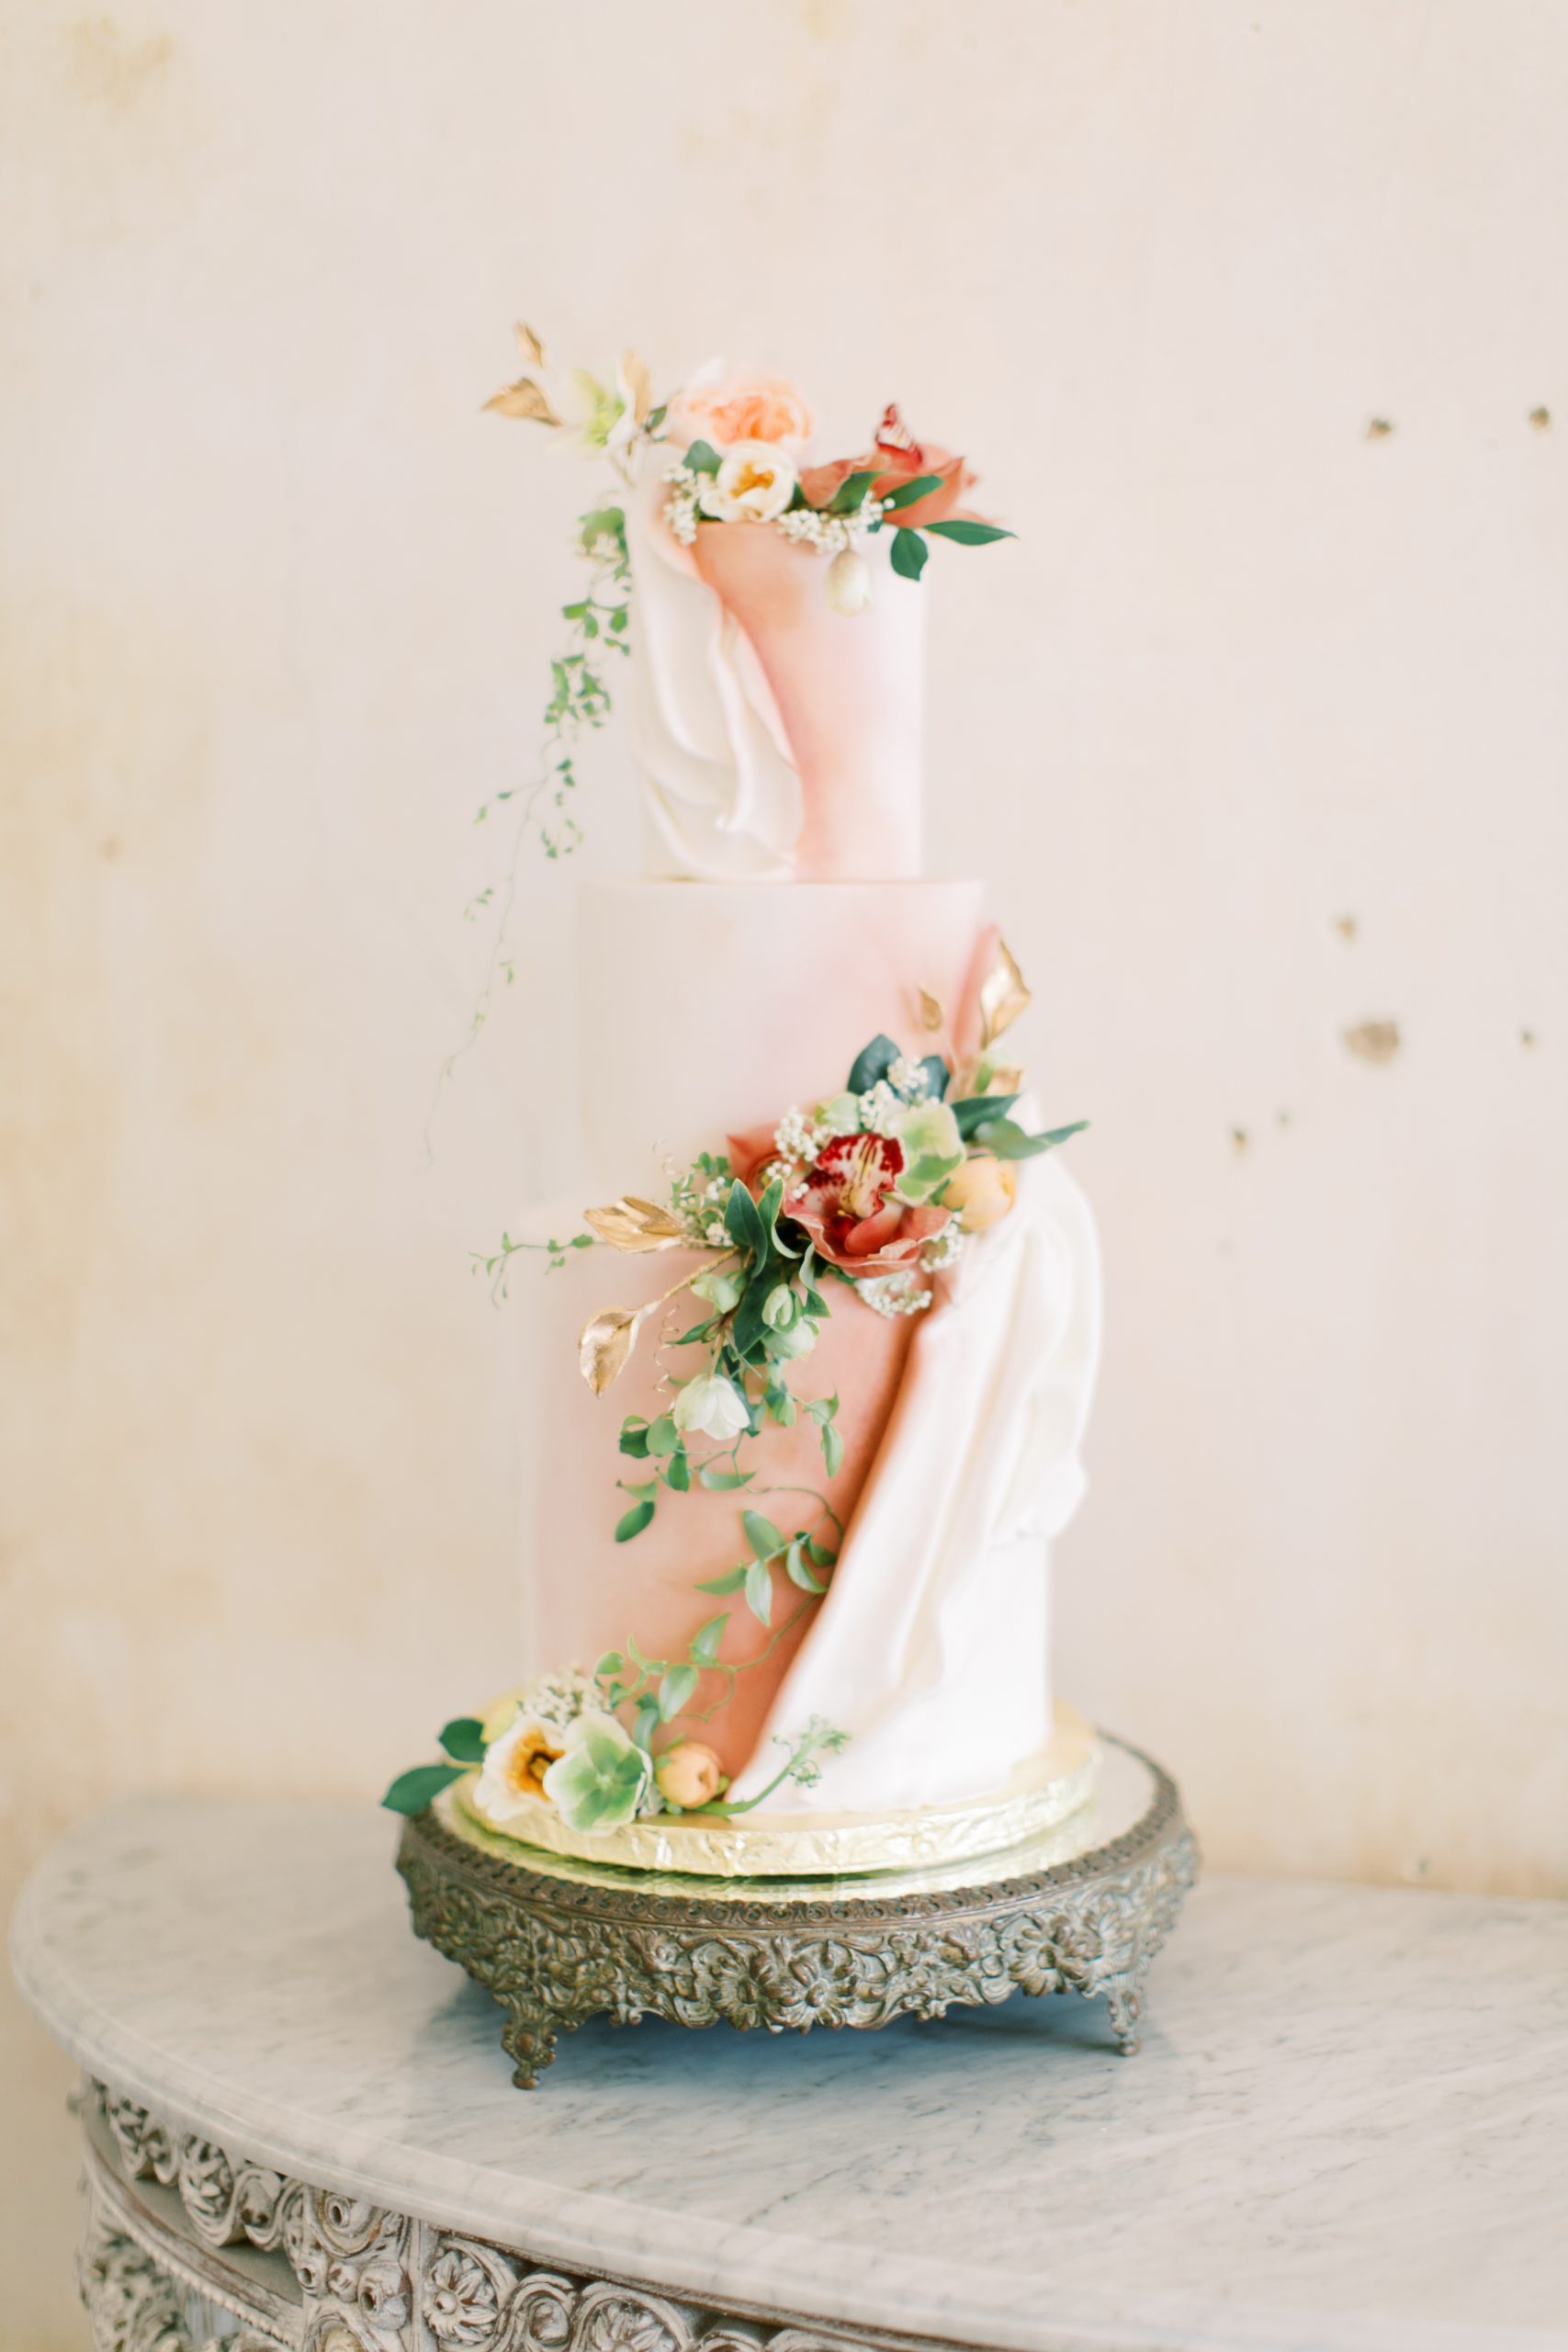 full length cake photo with pastel colors and florals on it